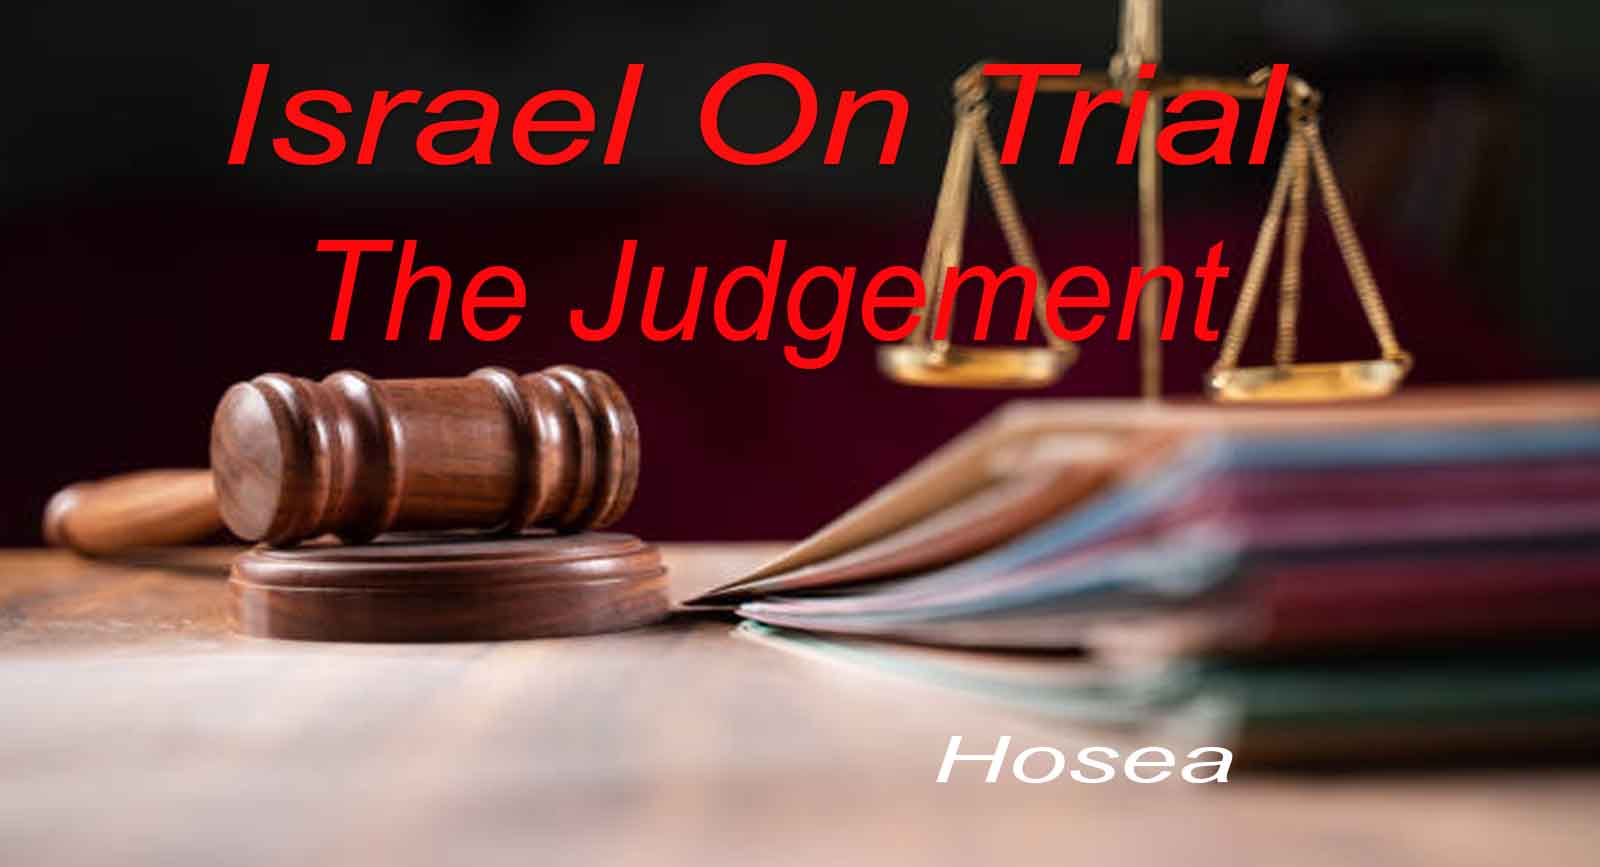 Israel On Trial – The Judgement